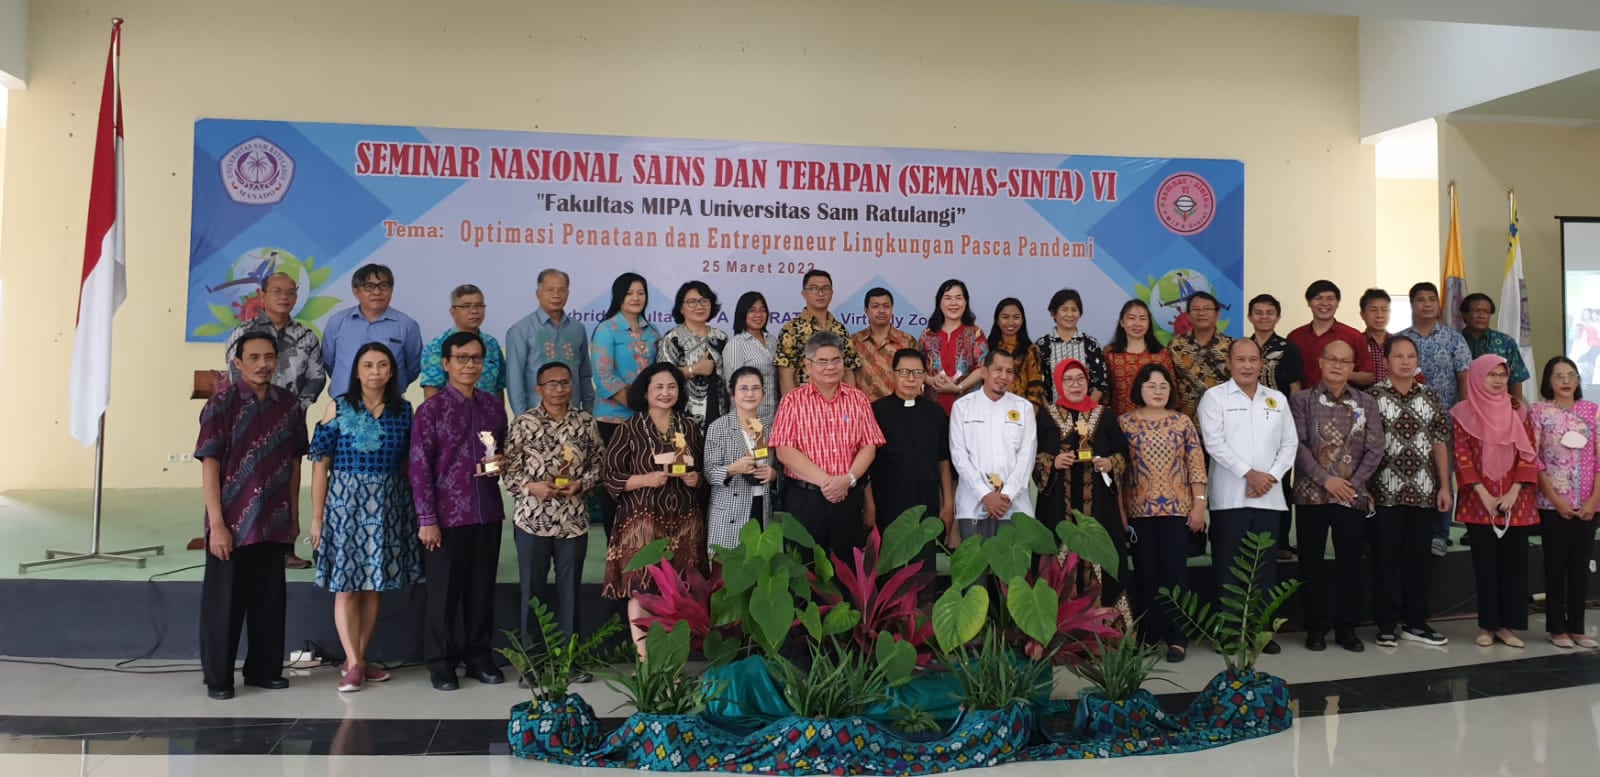 Dean of FMIPA invited as keynote speaker in National Seminar on Science and Applied VI at Sam Ratulangi University